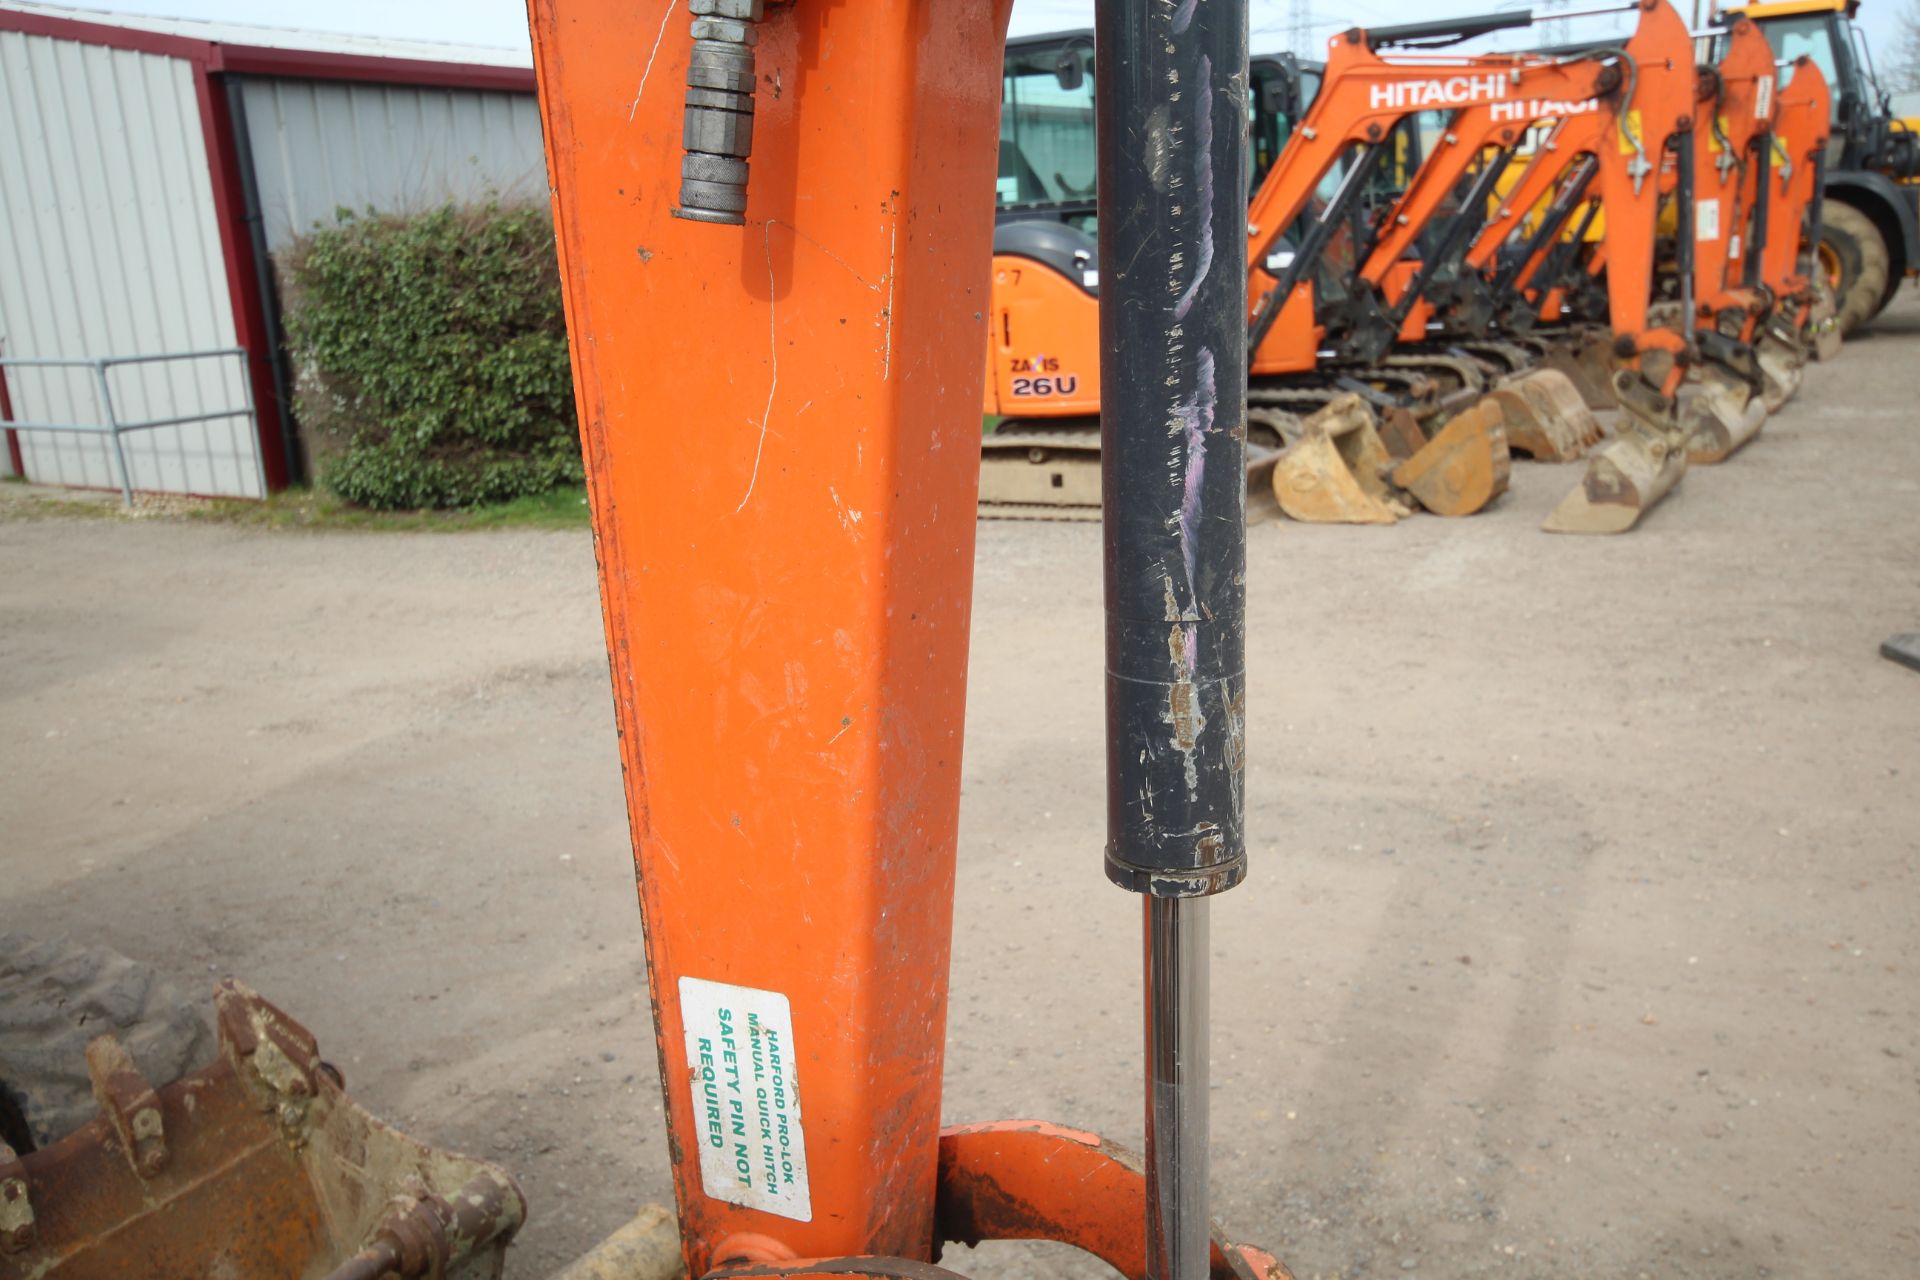 Hitachi Z-Axis 26U-5A 2.6T rubber track excavator. 2019. 2,120 hours. Serial number HCM - Image 7 of 61